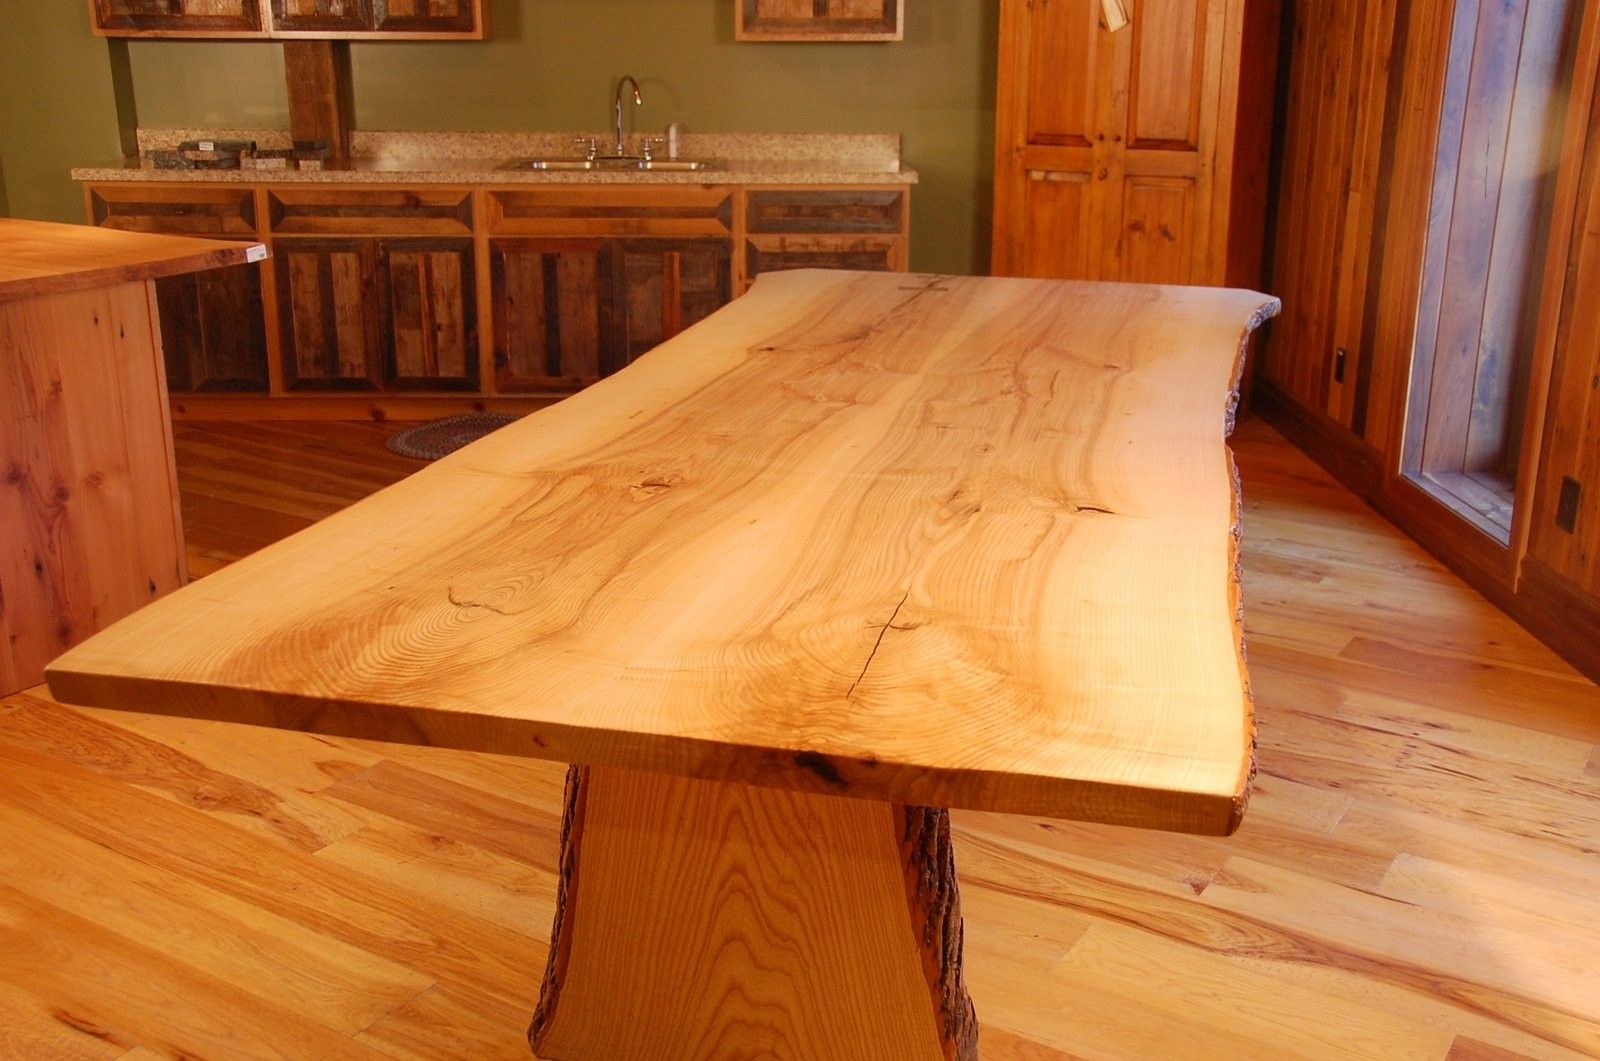 Hand Crafted Live Edge Ash Slab Dining Table By Corey Morgan Wood